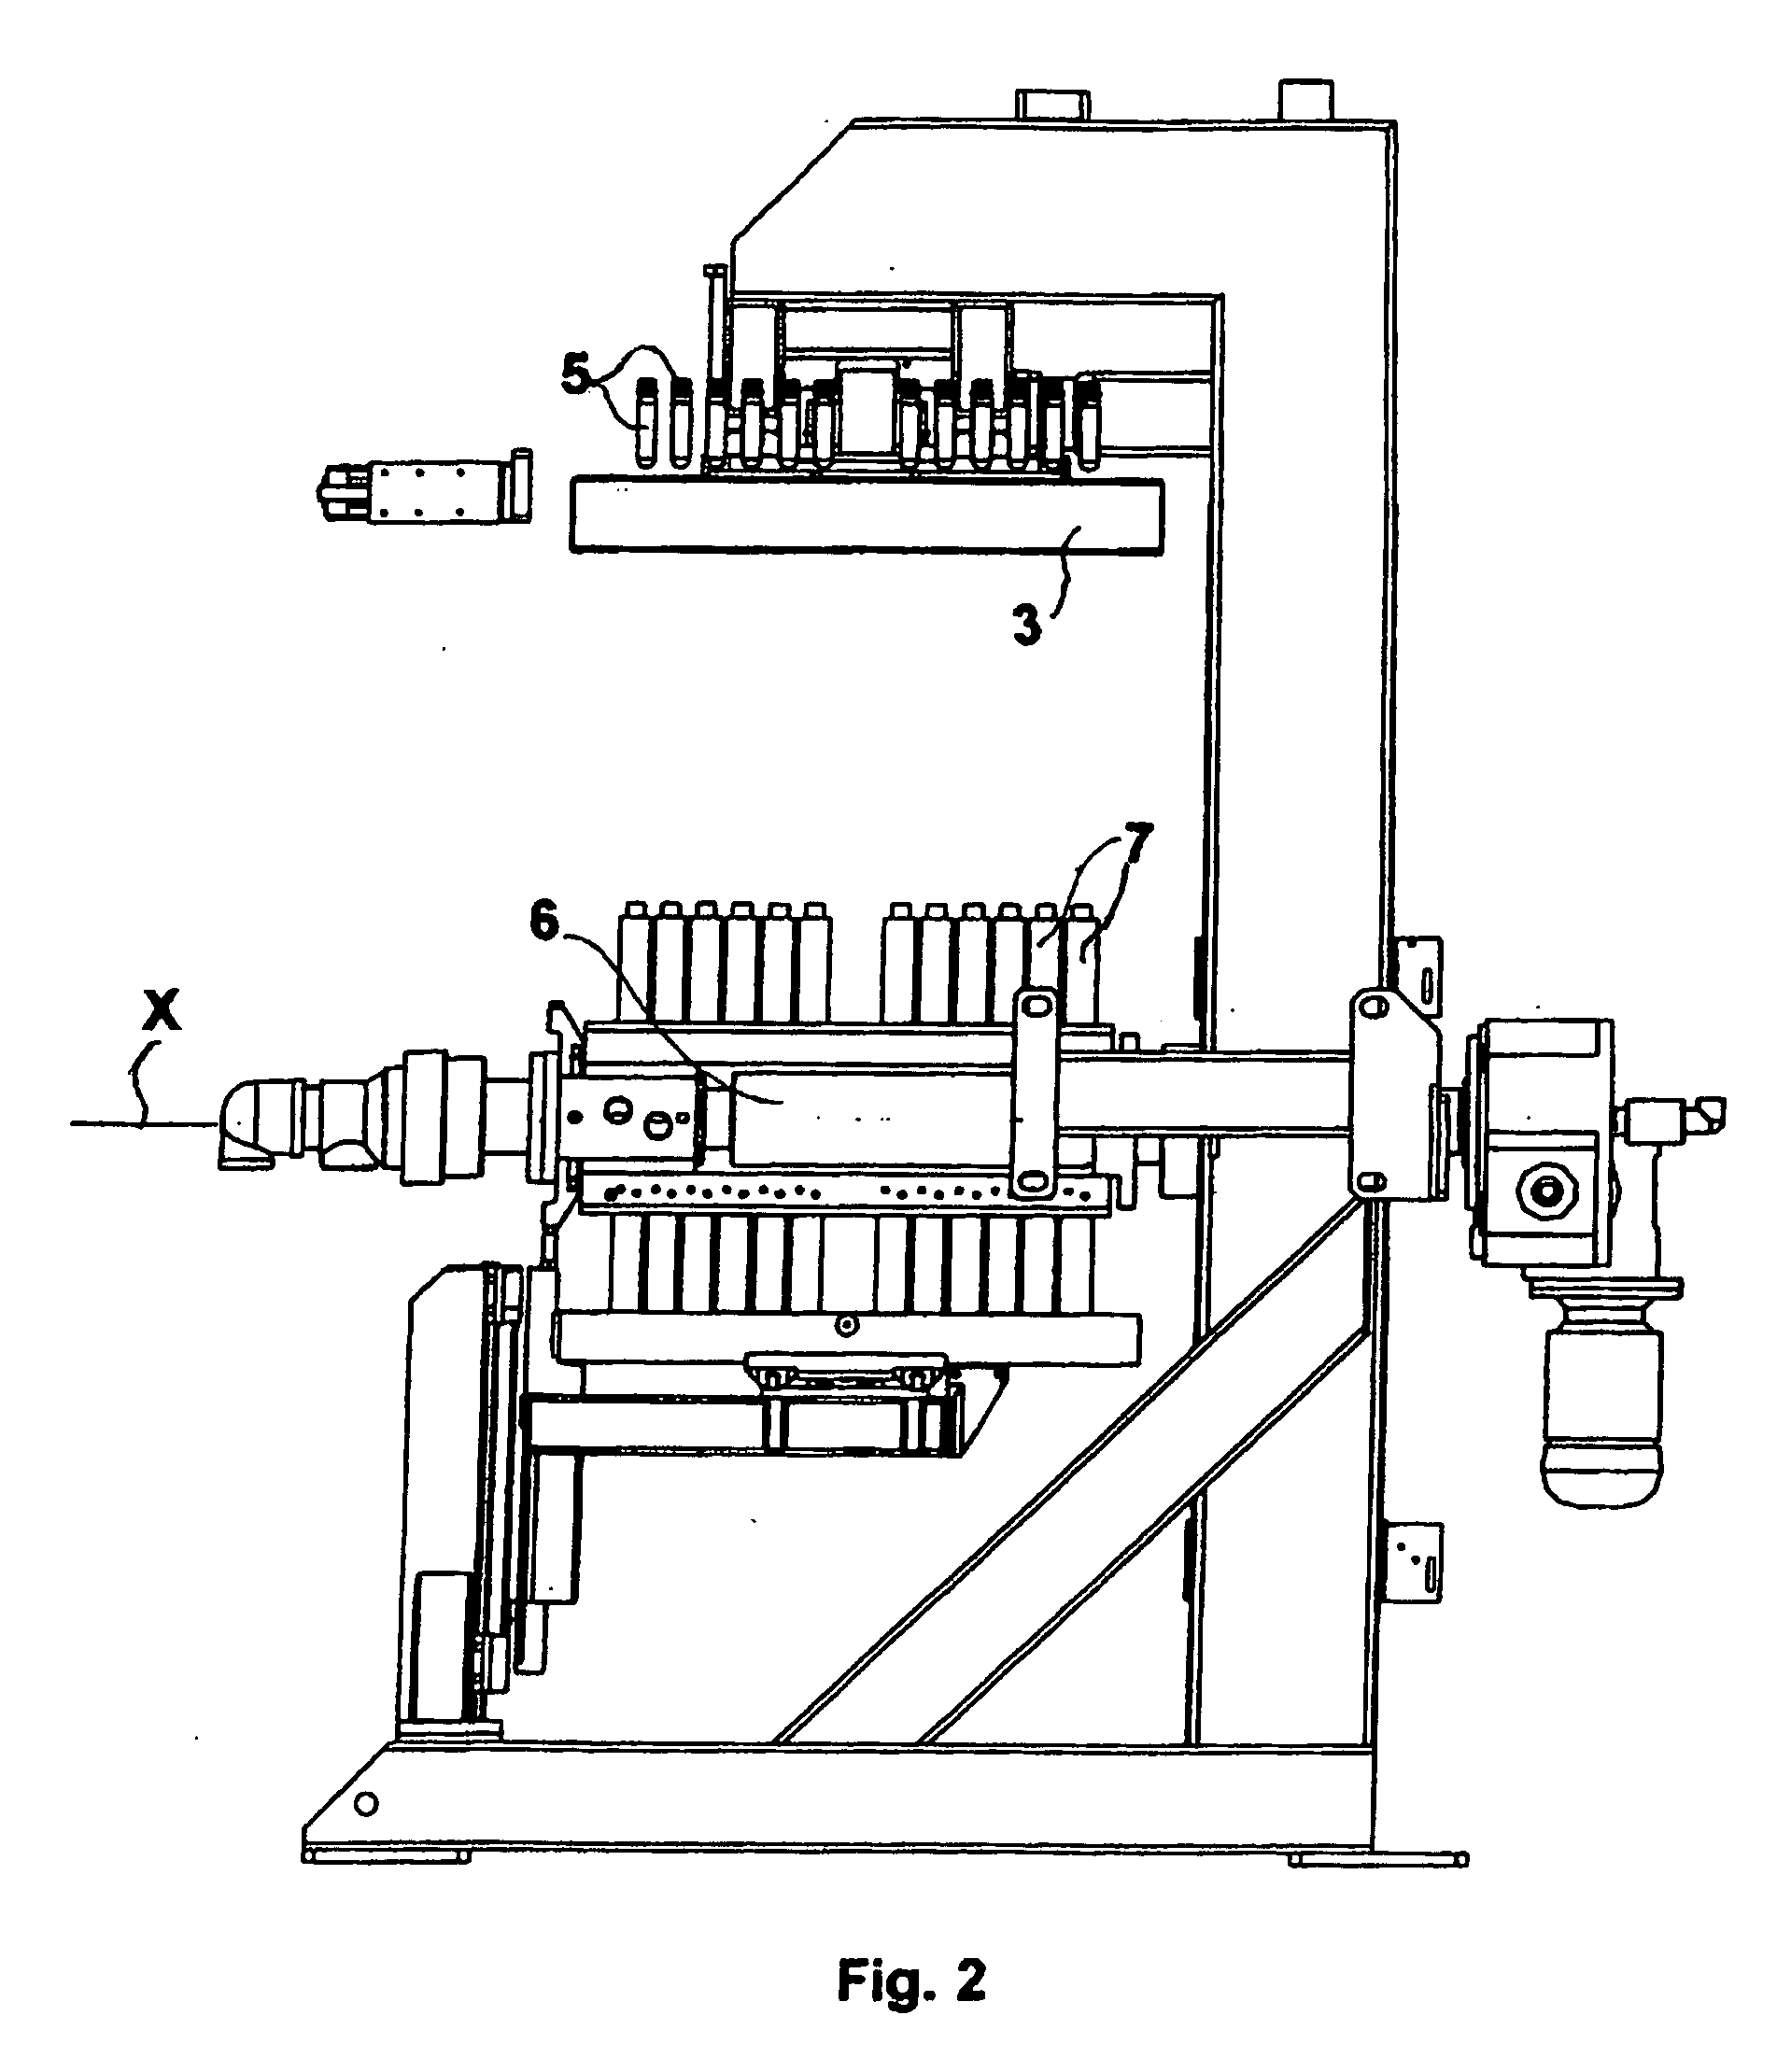 Injection device and process for plastic objects